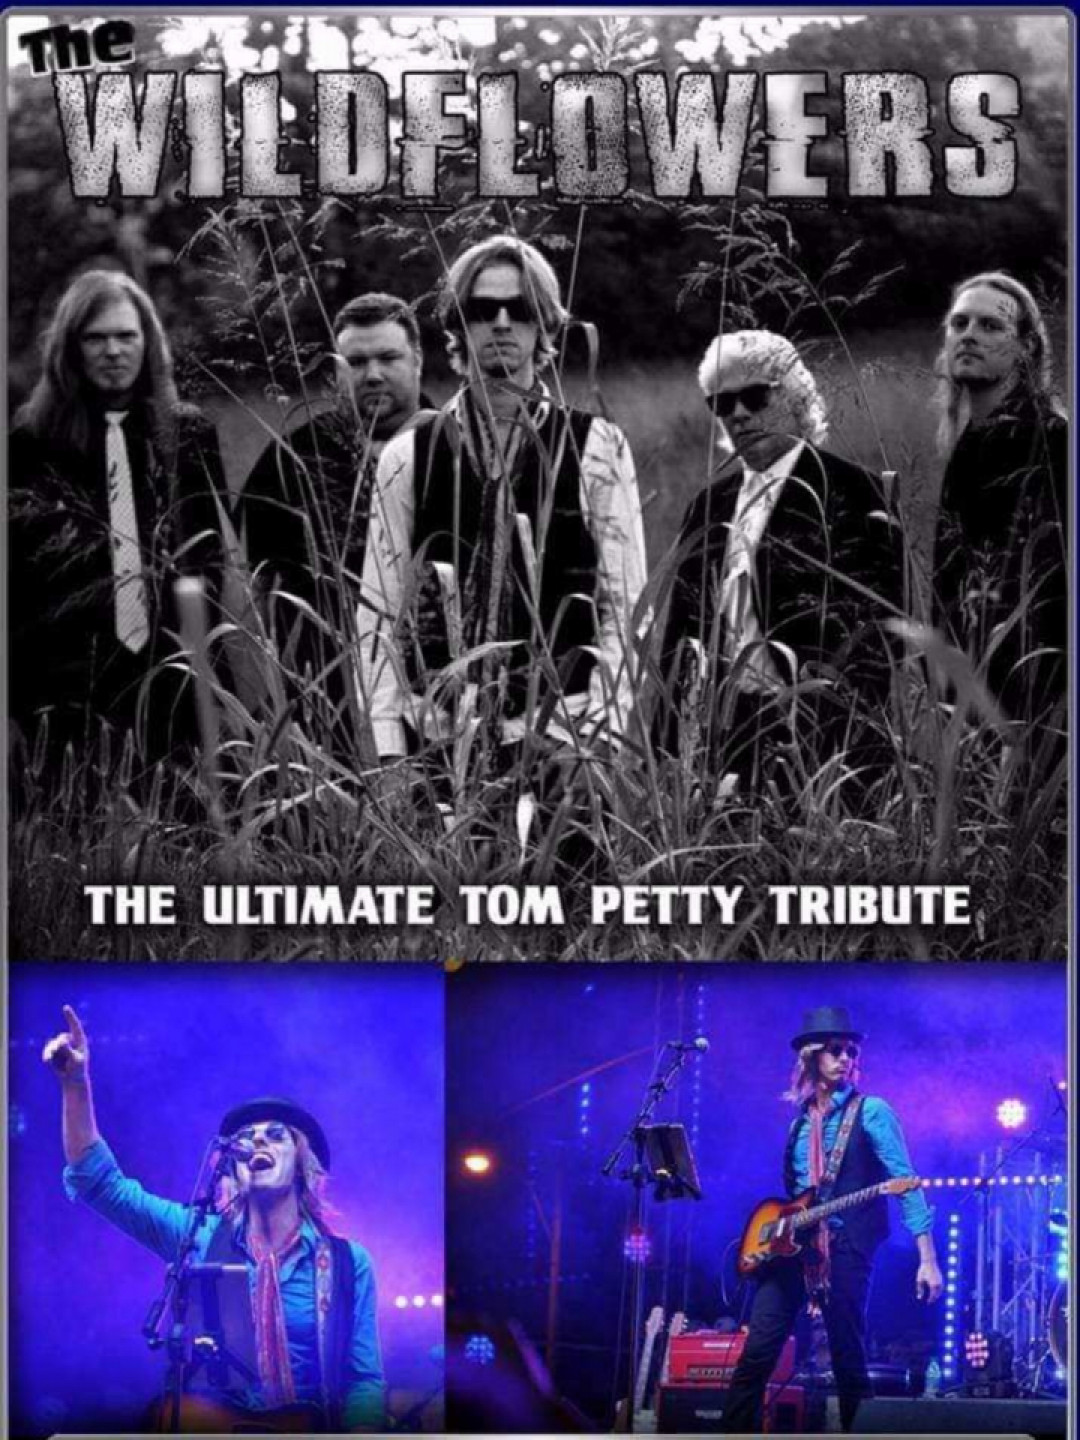 The Ultimate Tom Petty Tribute, The Wildflowers, at Brooklyn Cantina, Saturday, June 22nd